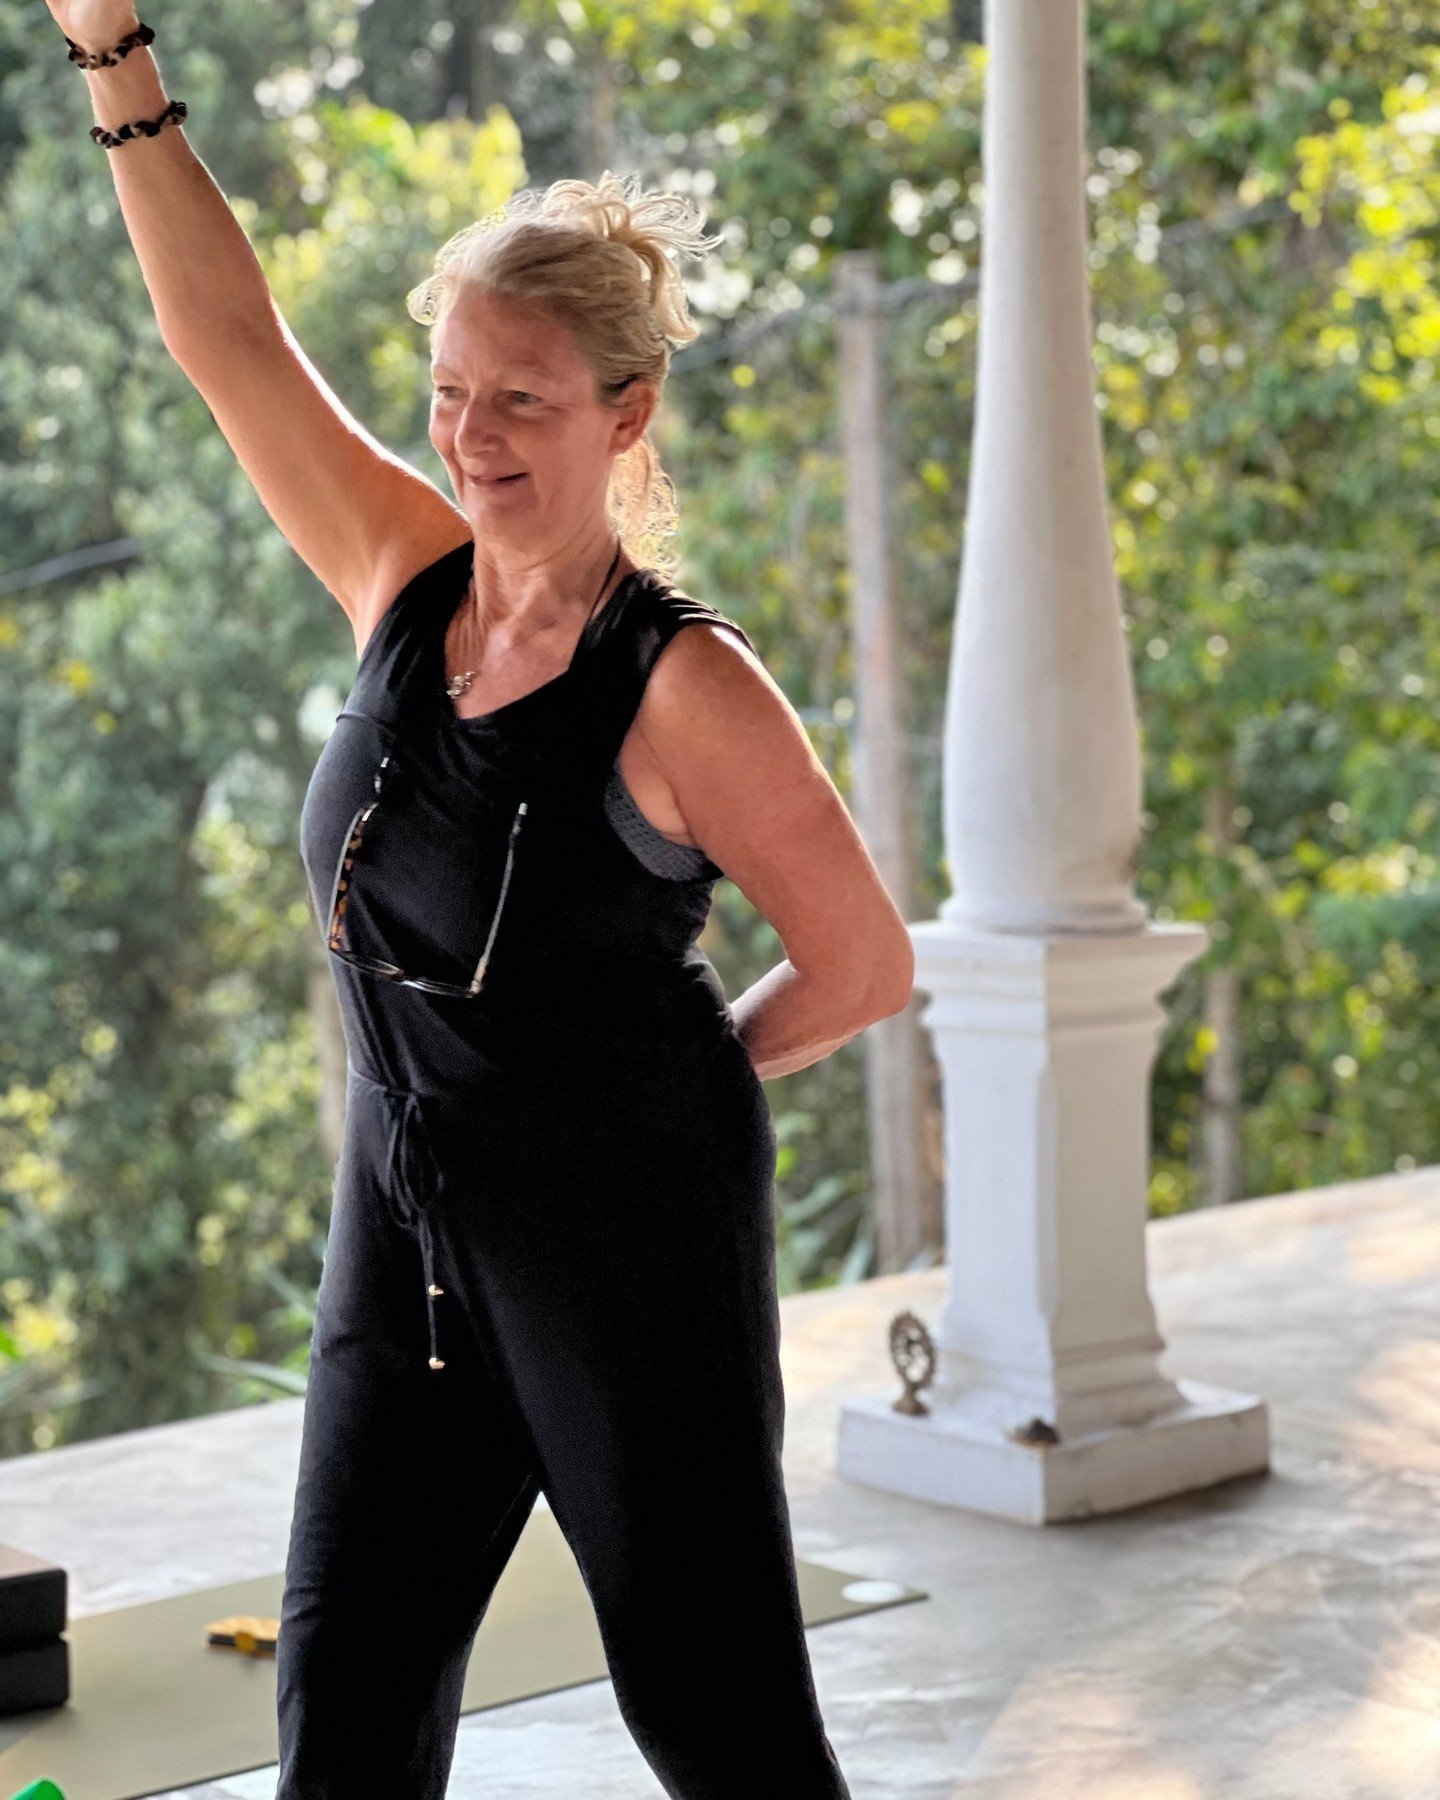 Hands up if you&rsquo;ve always wanted to take yourself on a yoga retreat but not sure what to expect? 

We hear this often &ldquo;oh I&rsquo;d love to do that, but &hellip; ✨I won&rsquo;t  know anyone
✨I&rsquo;ve never travelled alone 
✨I&rsquo;m no